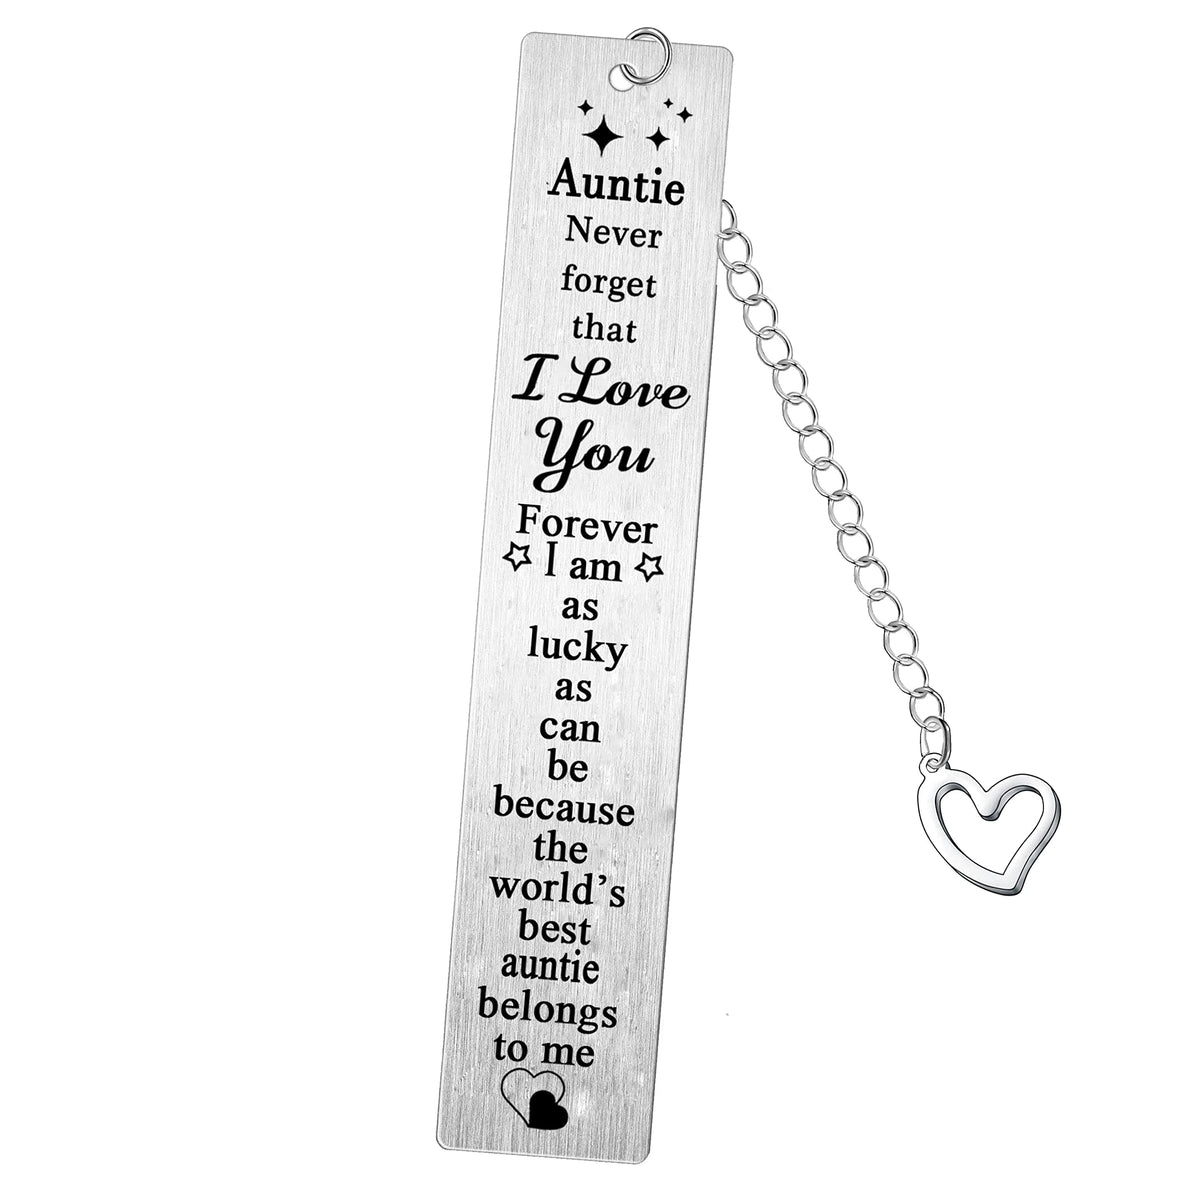 Auntie Bookmark Gifts Aunt Metal Bookmarks Keepsakes Aunt Birthday Mothers Day Gift from Nephew Niece Best Aunt Bookmark Present